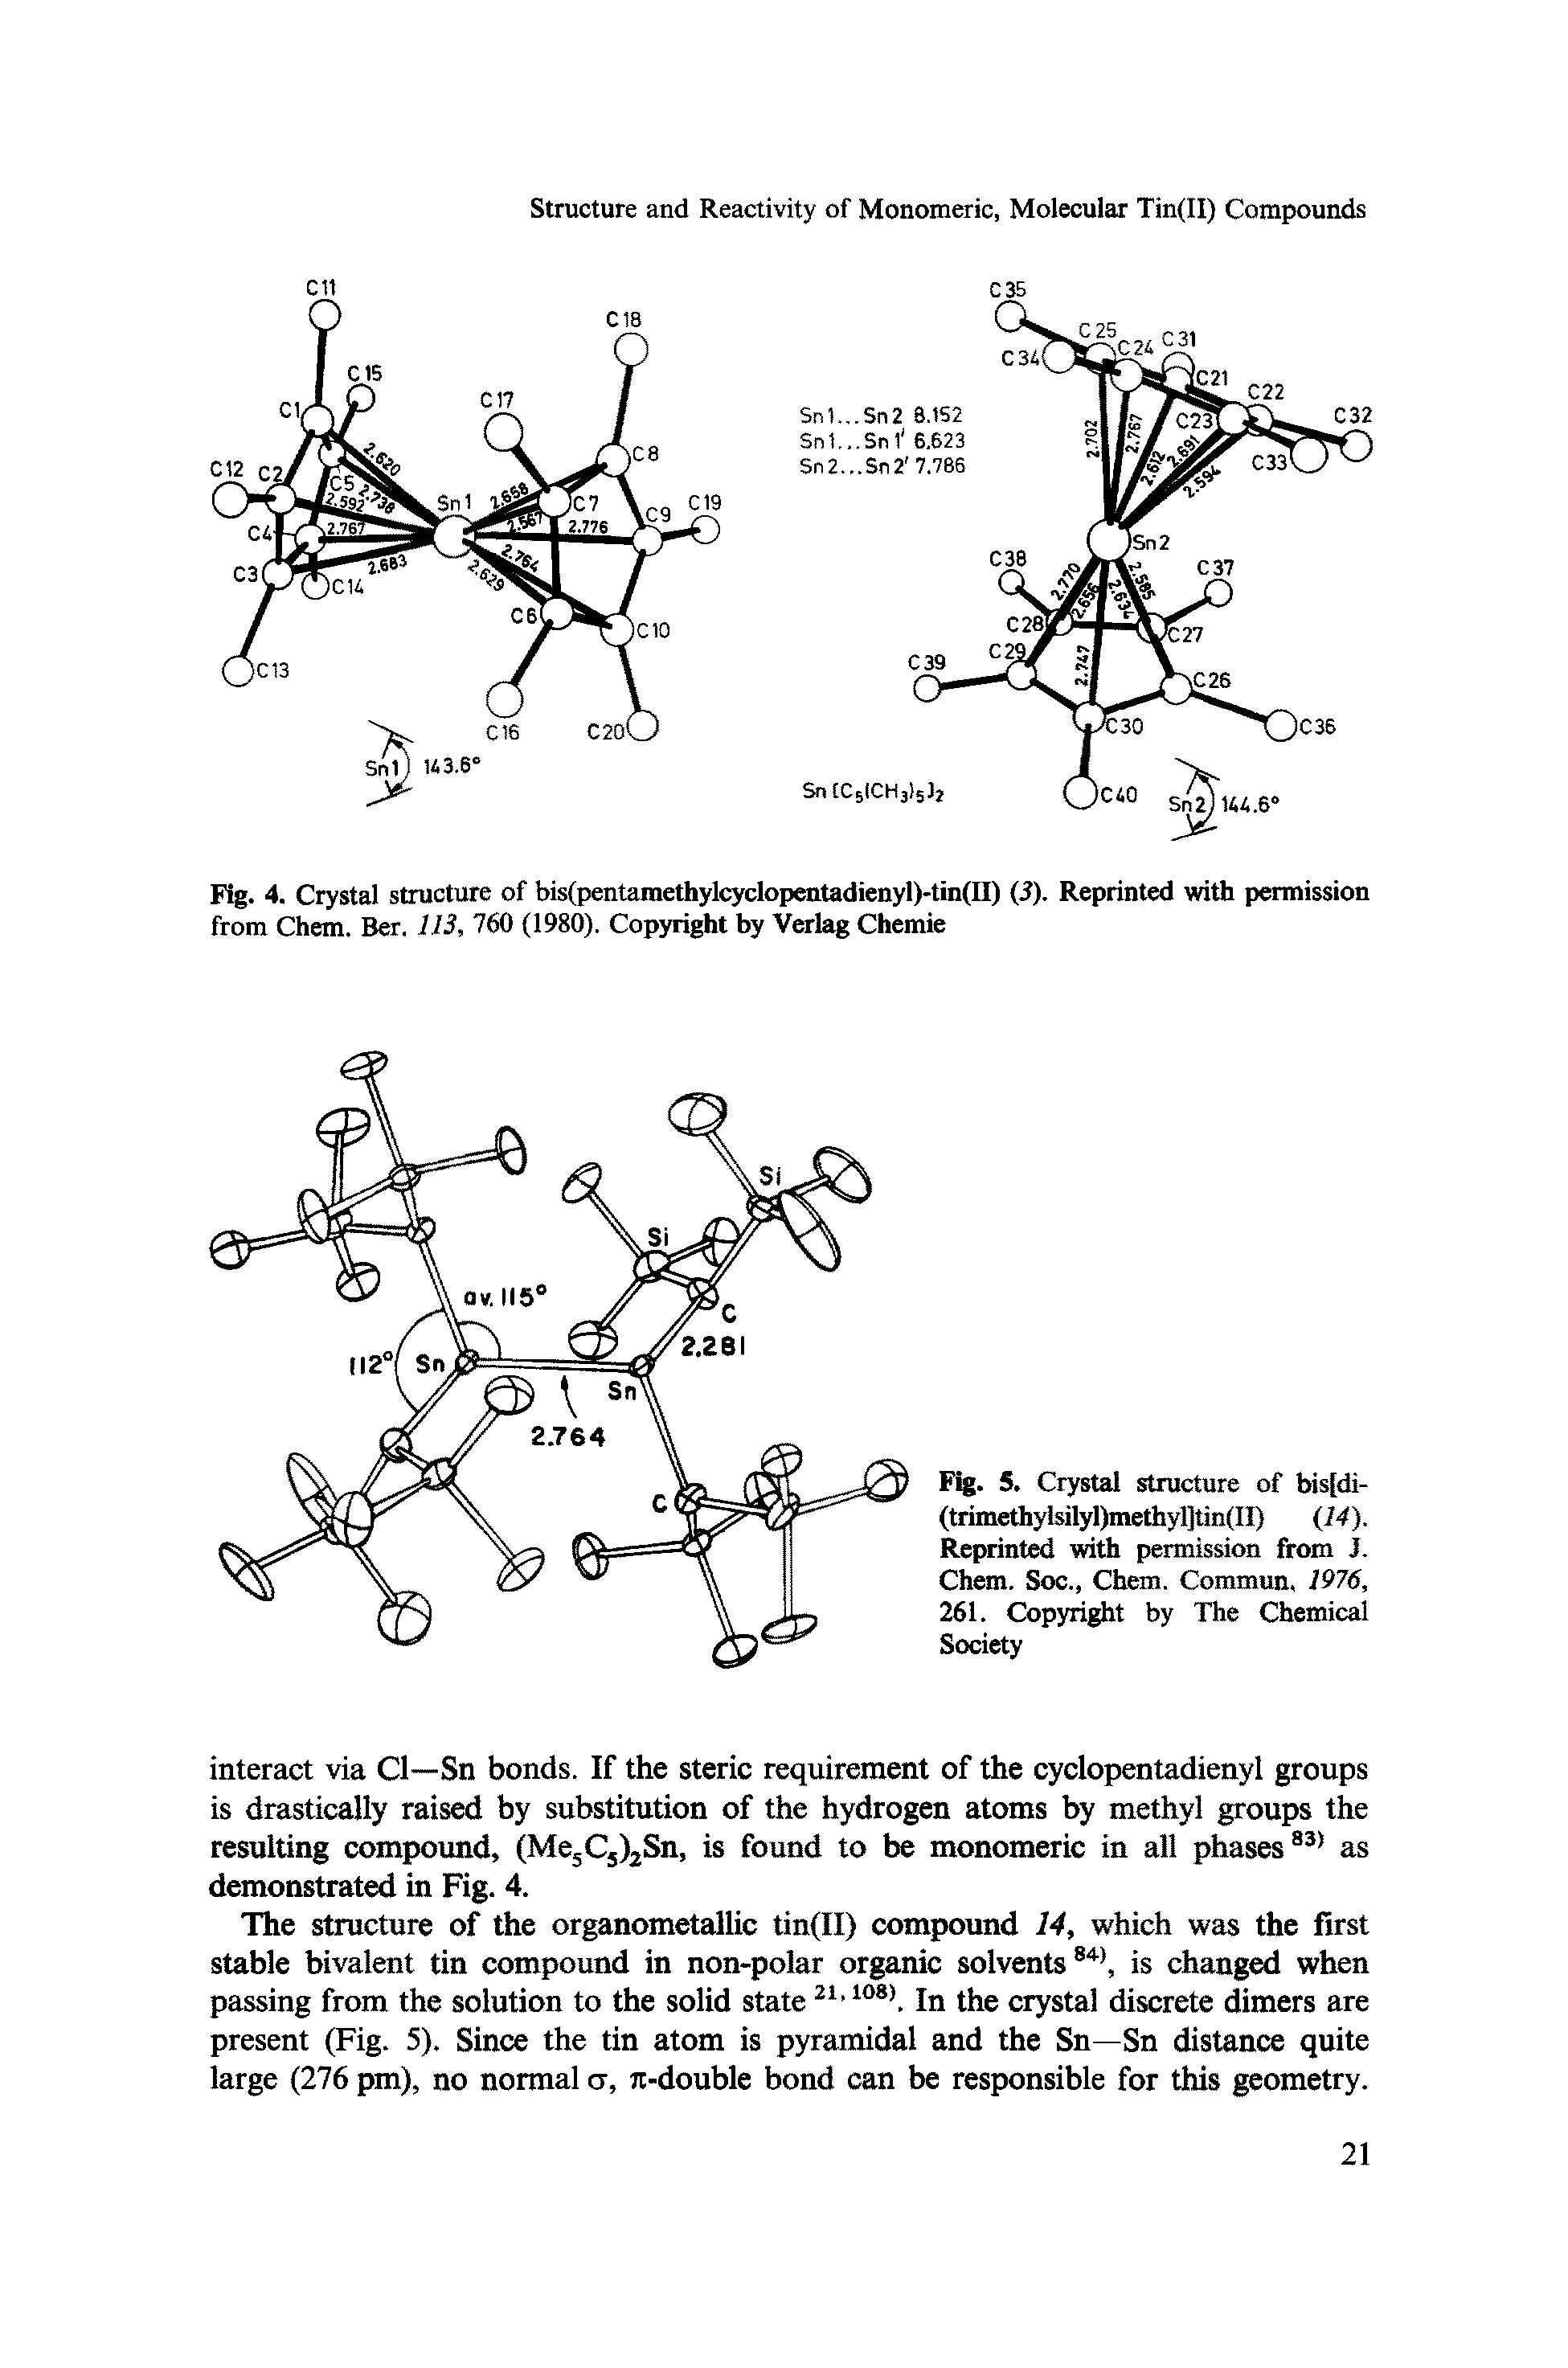 Fig. 5. Crystal structure of bis[di-(trimethylsilyl)methyl]tin(II) (14). Reprinted with permission from J. Chem. Soc., Chem. Commun, 1976, 261. Copyright by The Chemical Society...